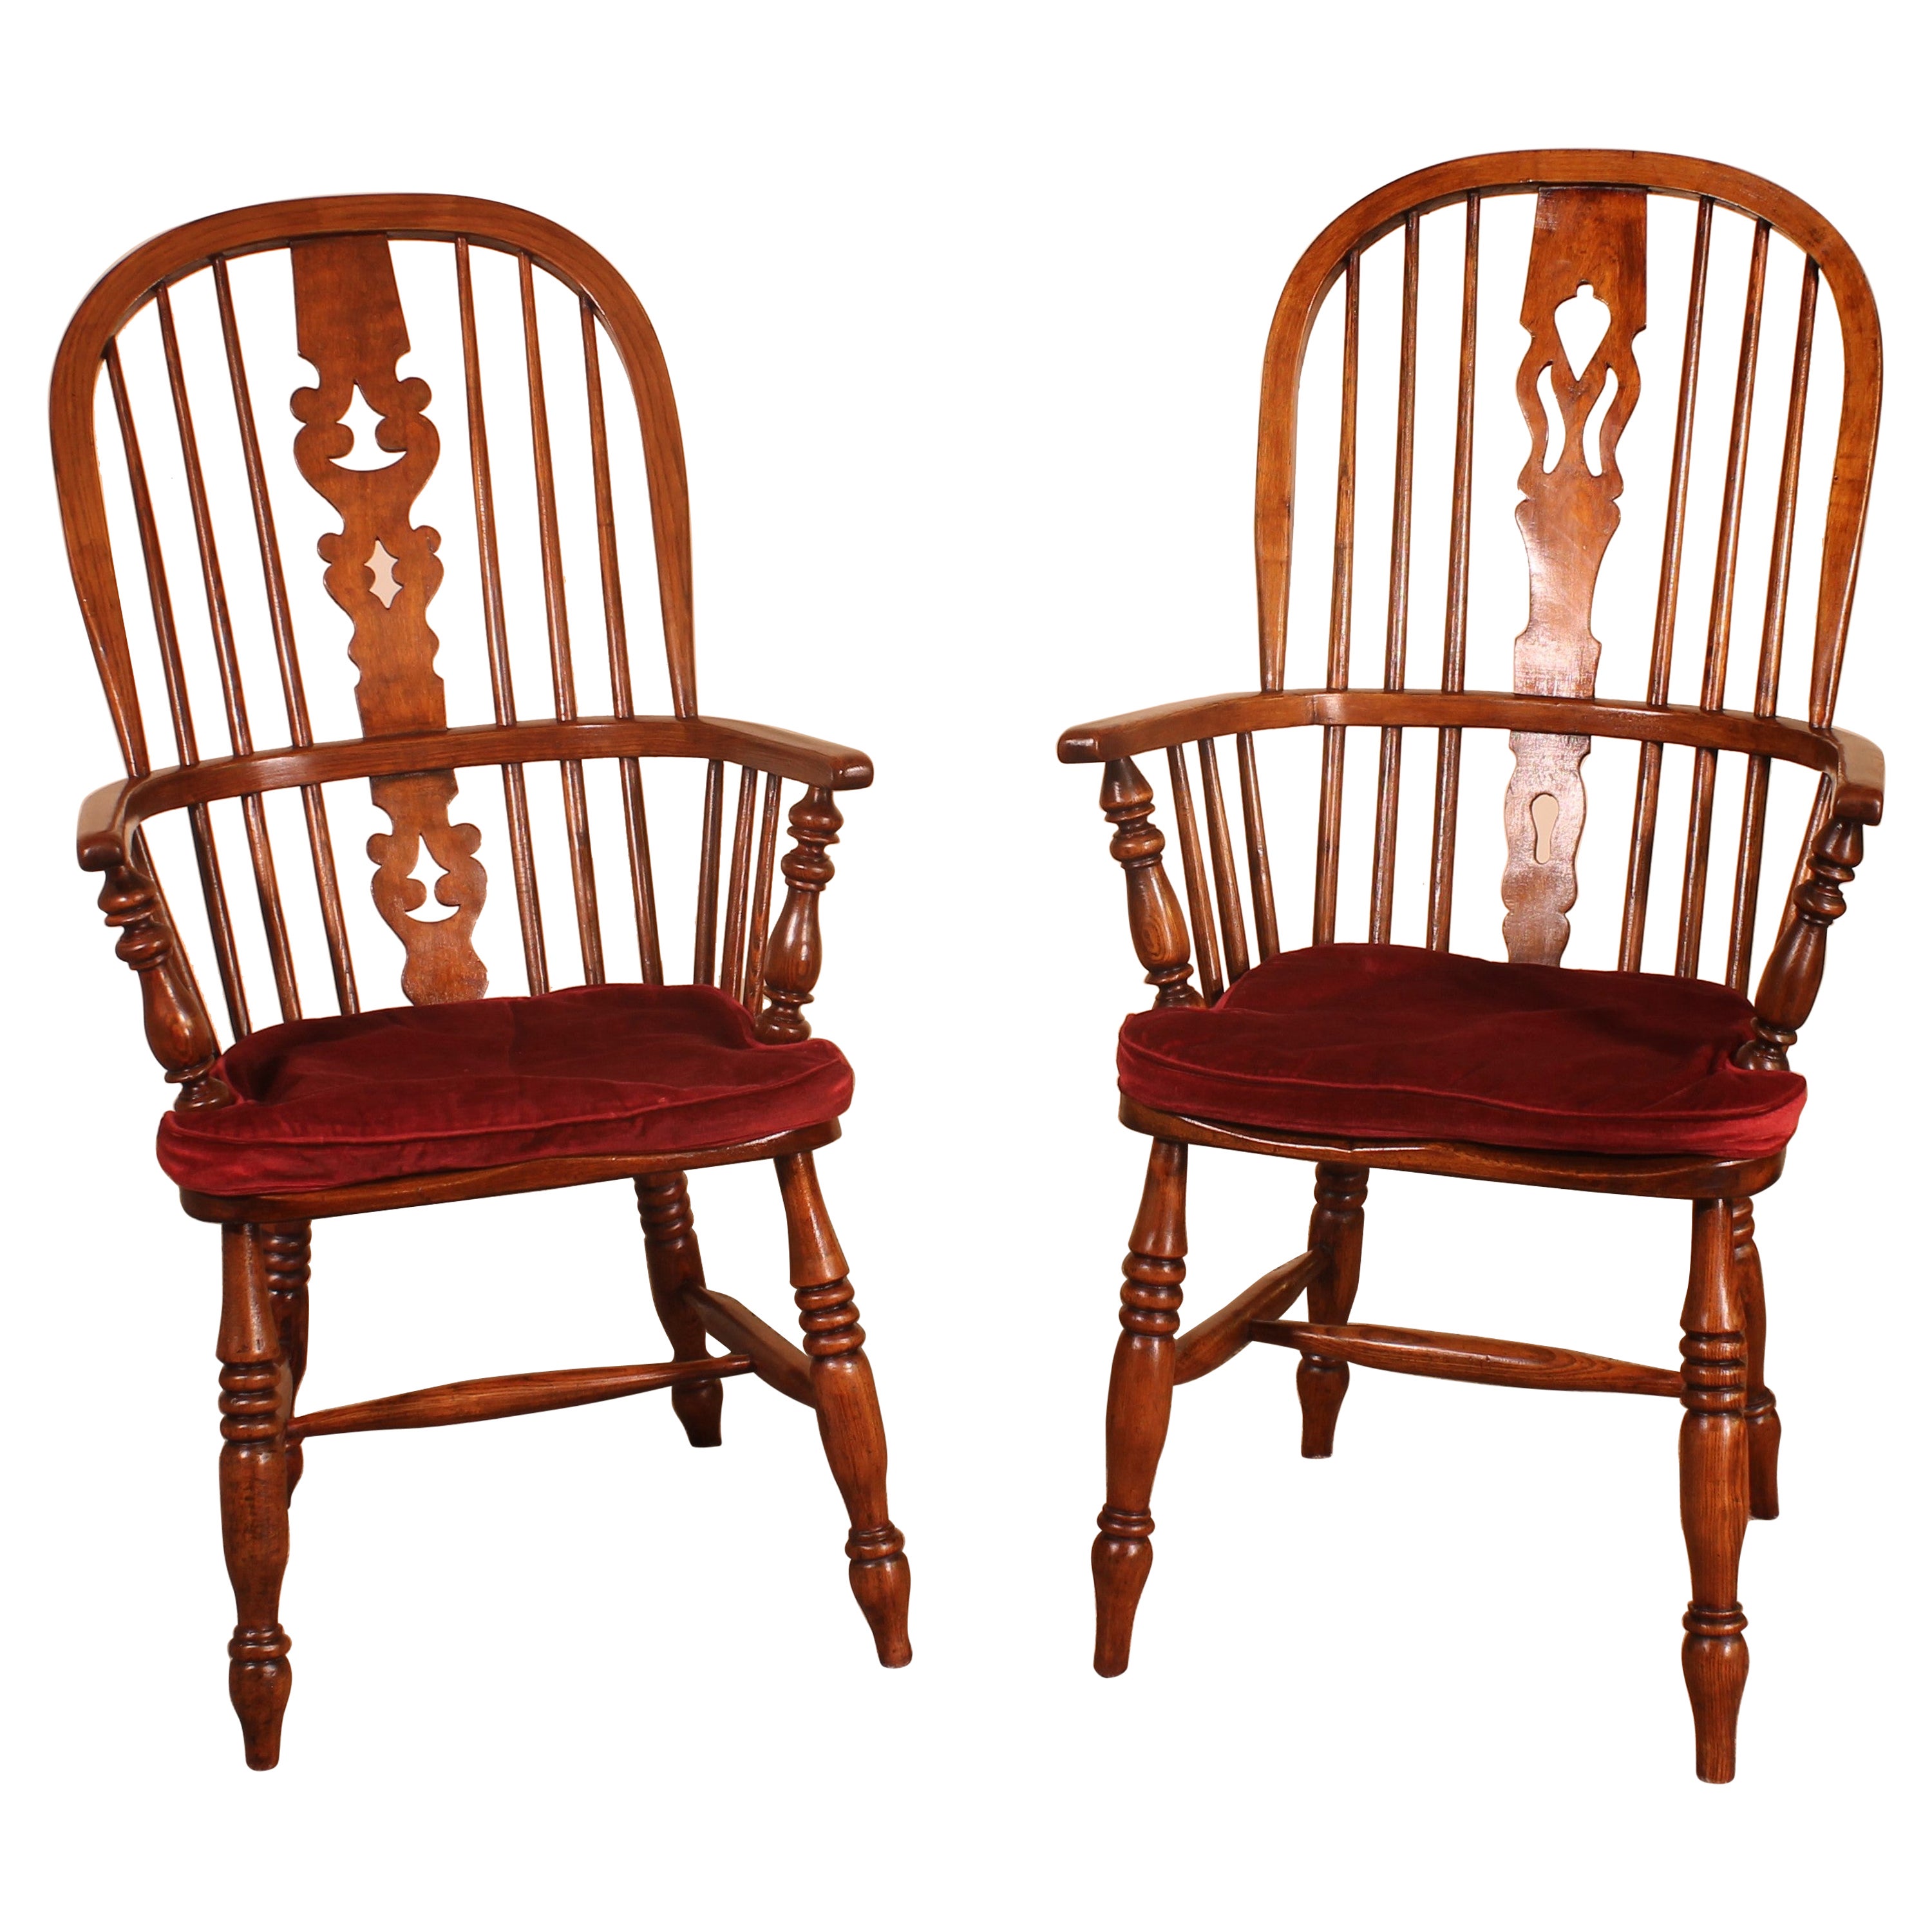 Near Pair of English Windsor Armchairs from the 19th Century